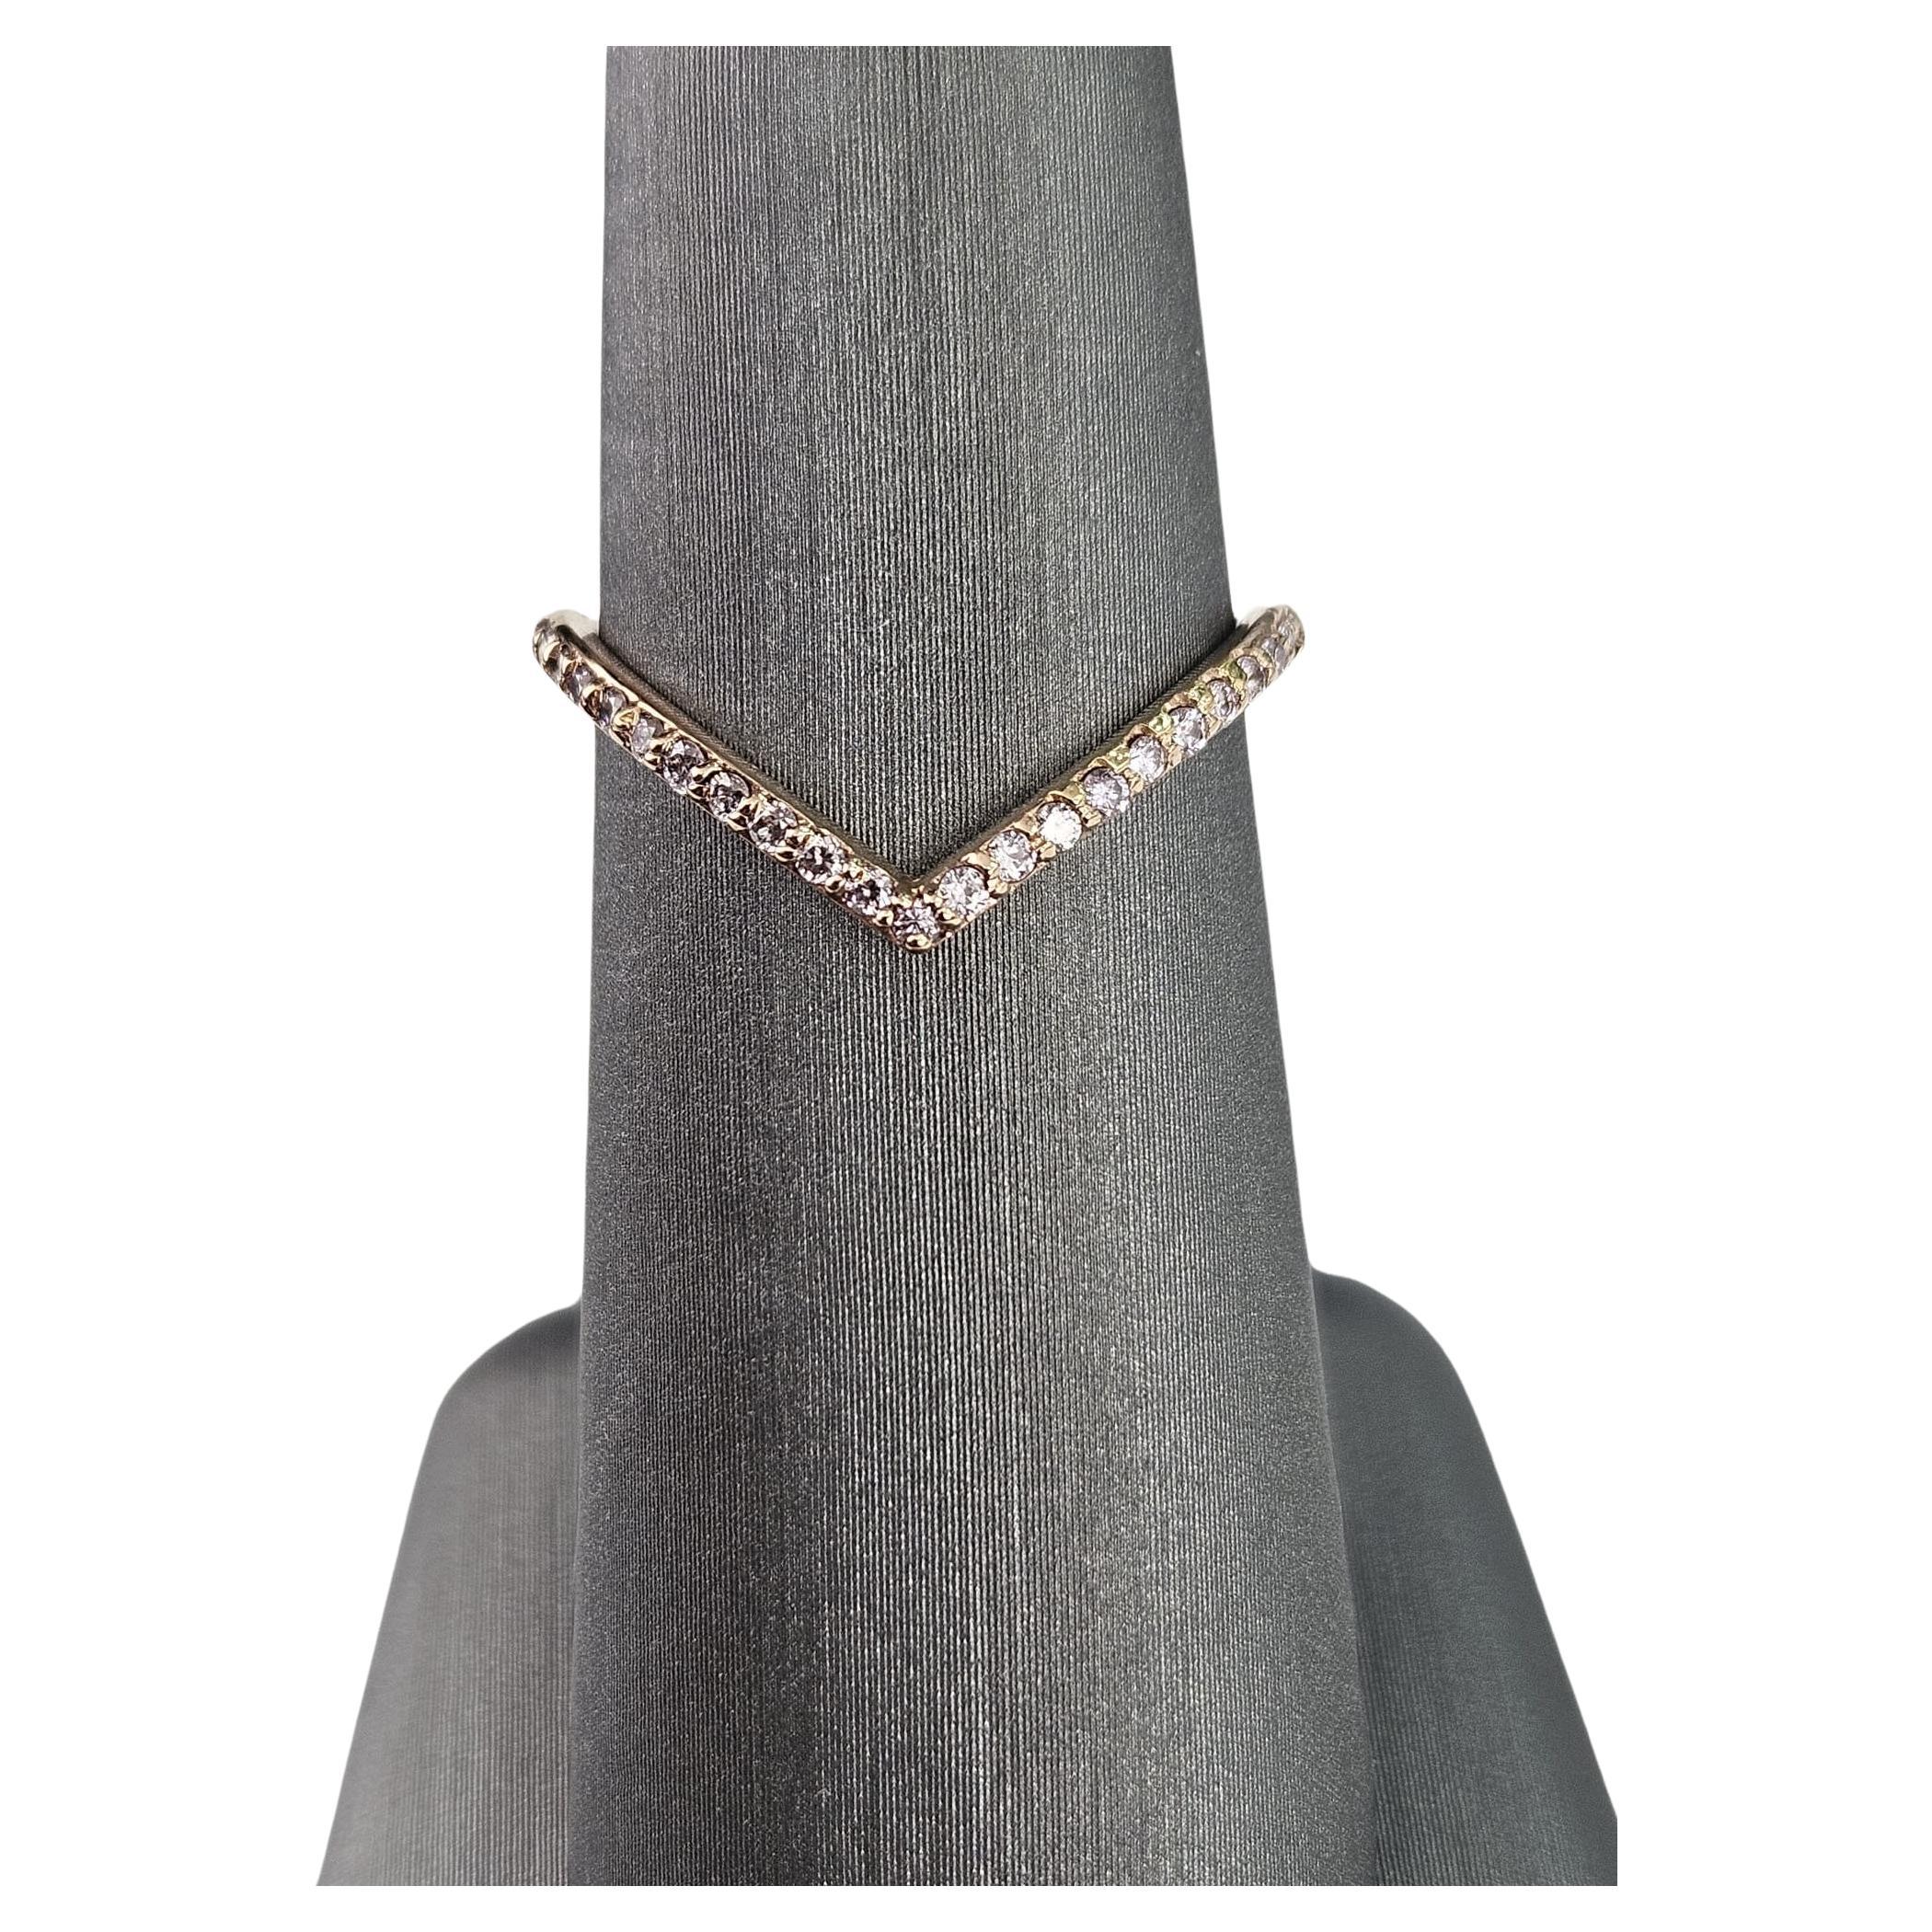 0.20 Ct Heart Shape Band Ring with Pink Diamonds